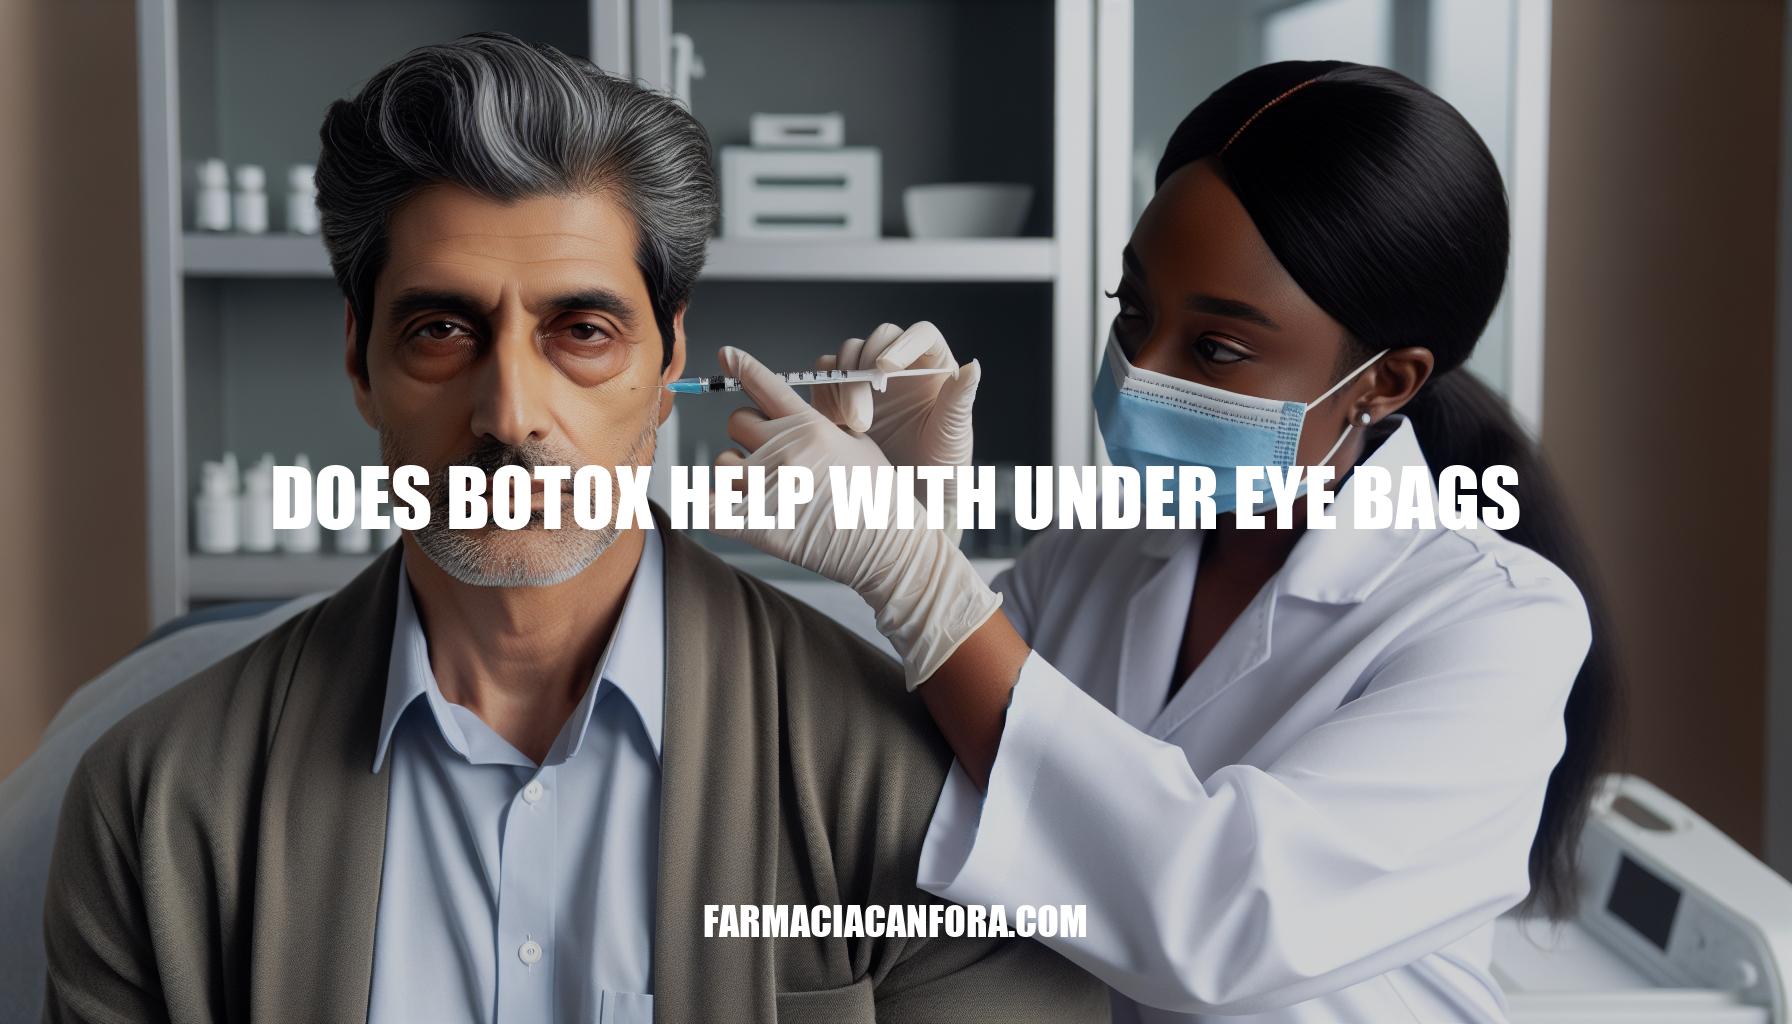 Does Botox Help with Under Eye Bags